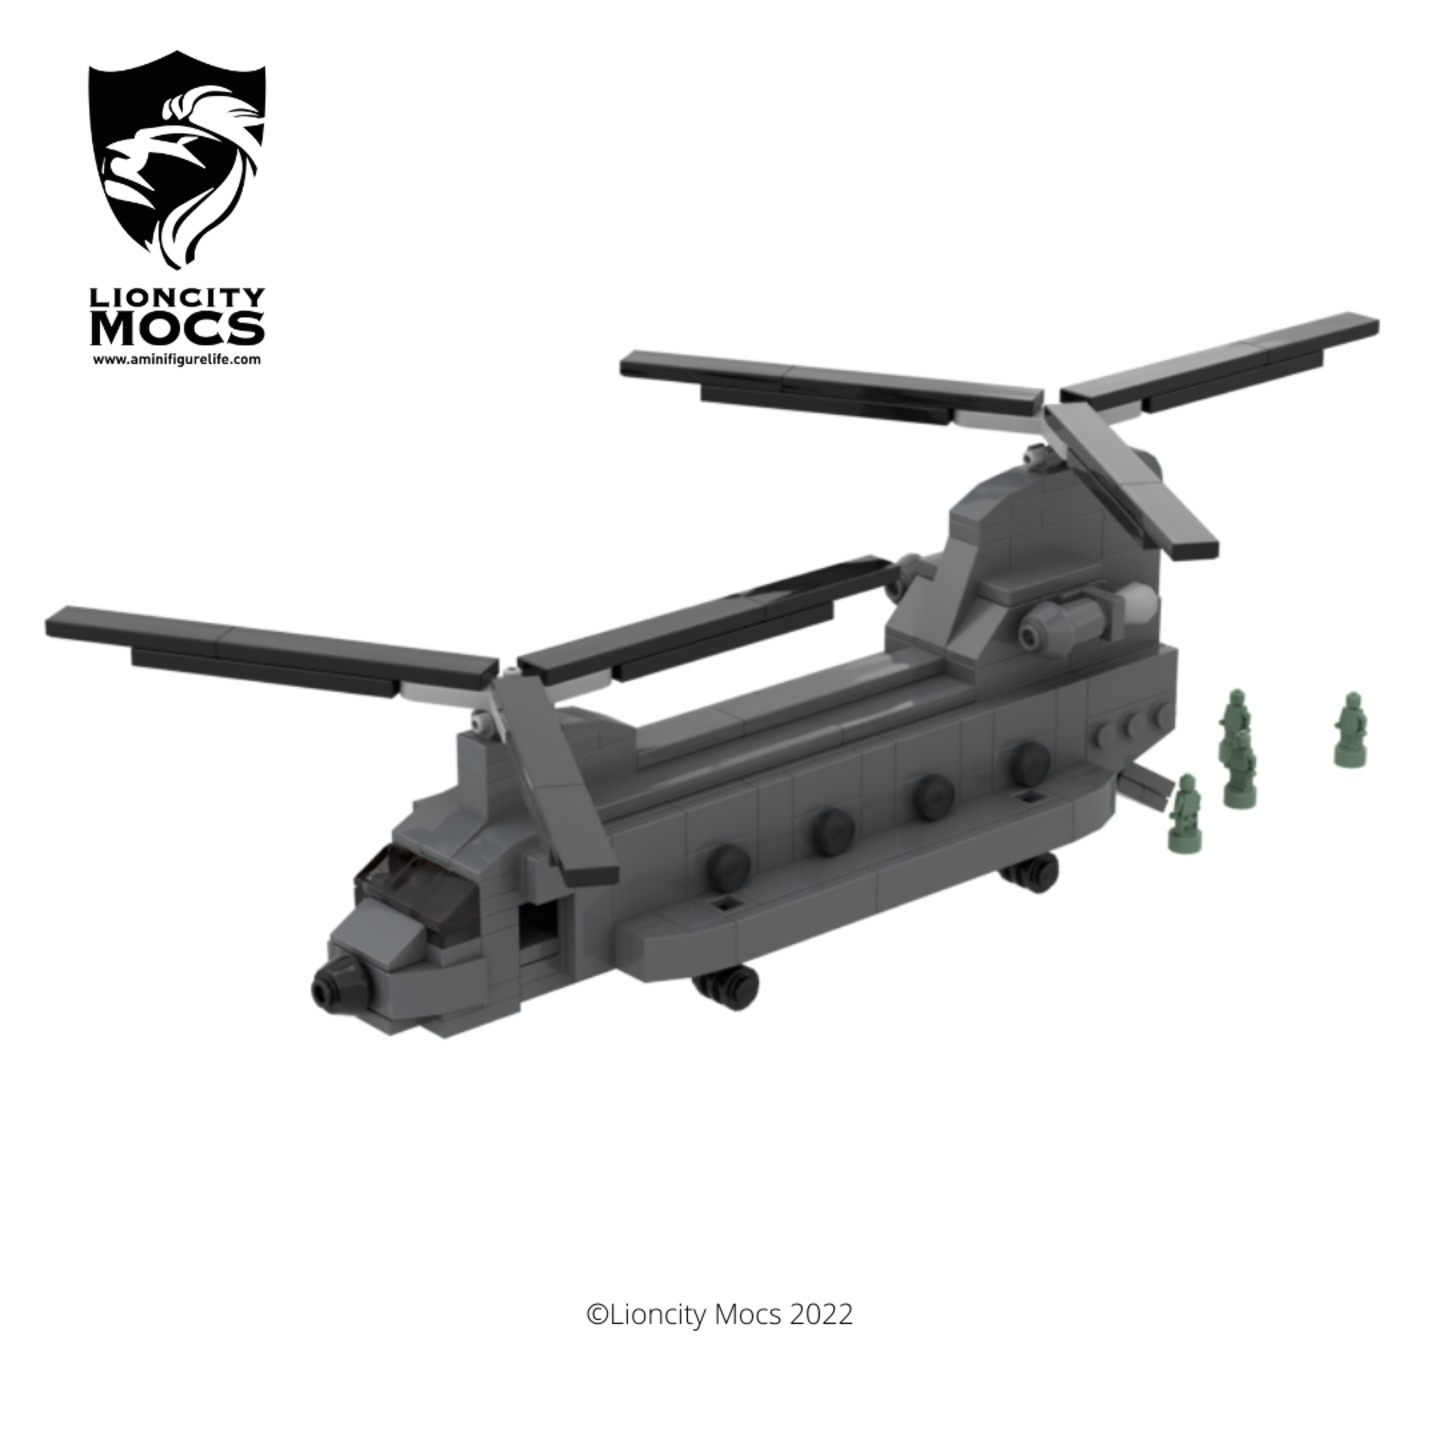  [PDF Instructions Only] CH-47 Chinook Helicopter Mini 